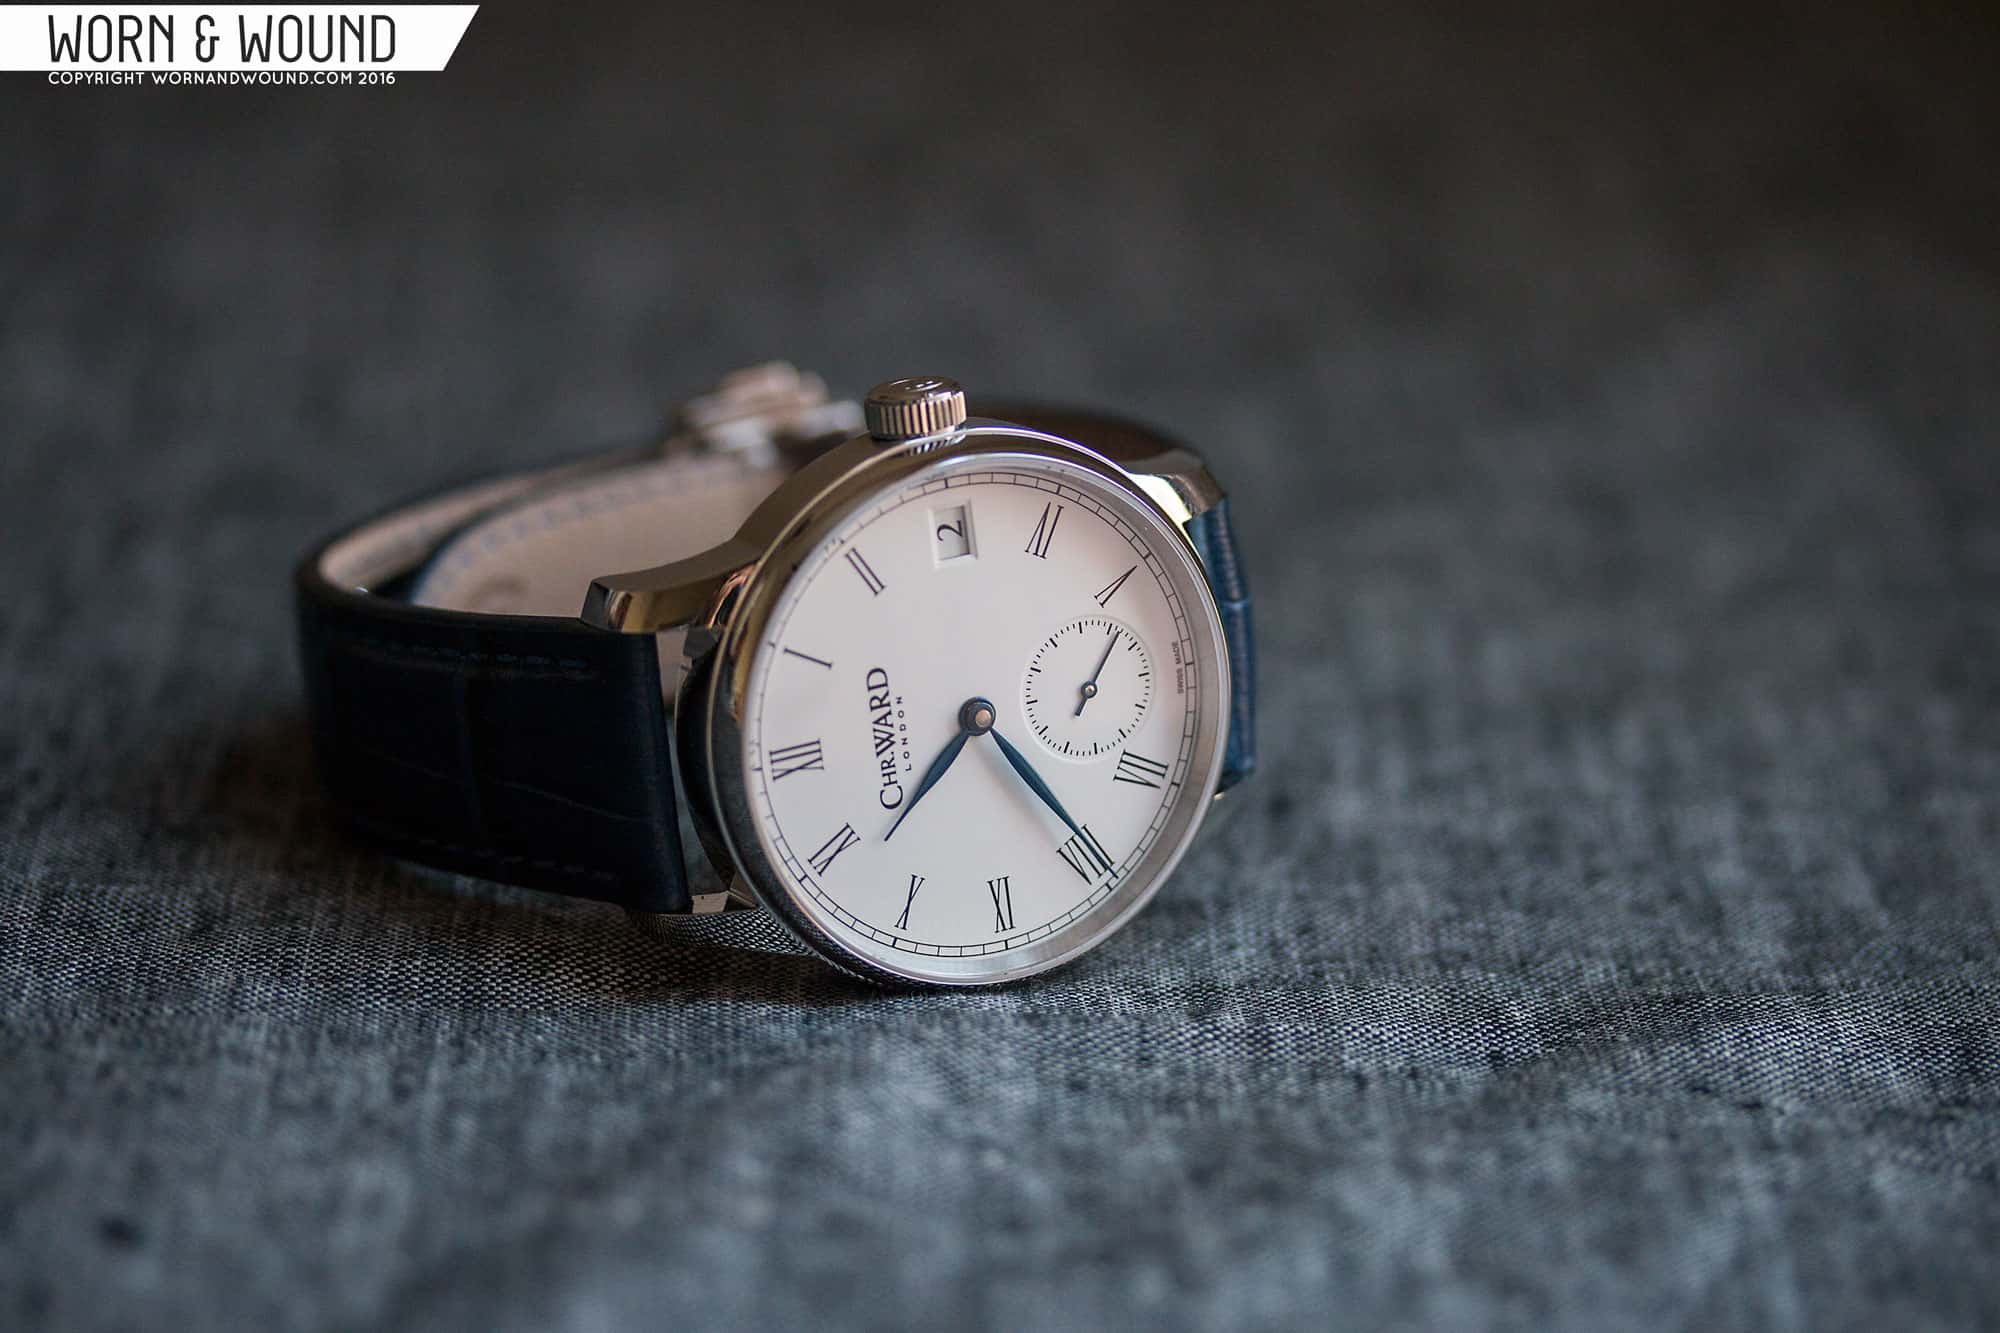 Christopher Ward C9 5-Day SS Chronometer Review - Worn & Wound